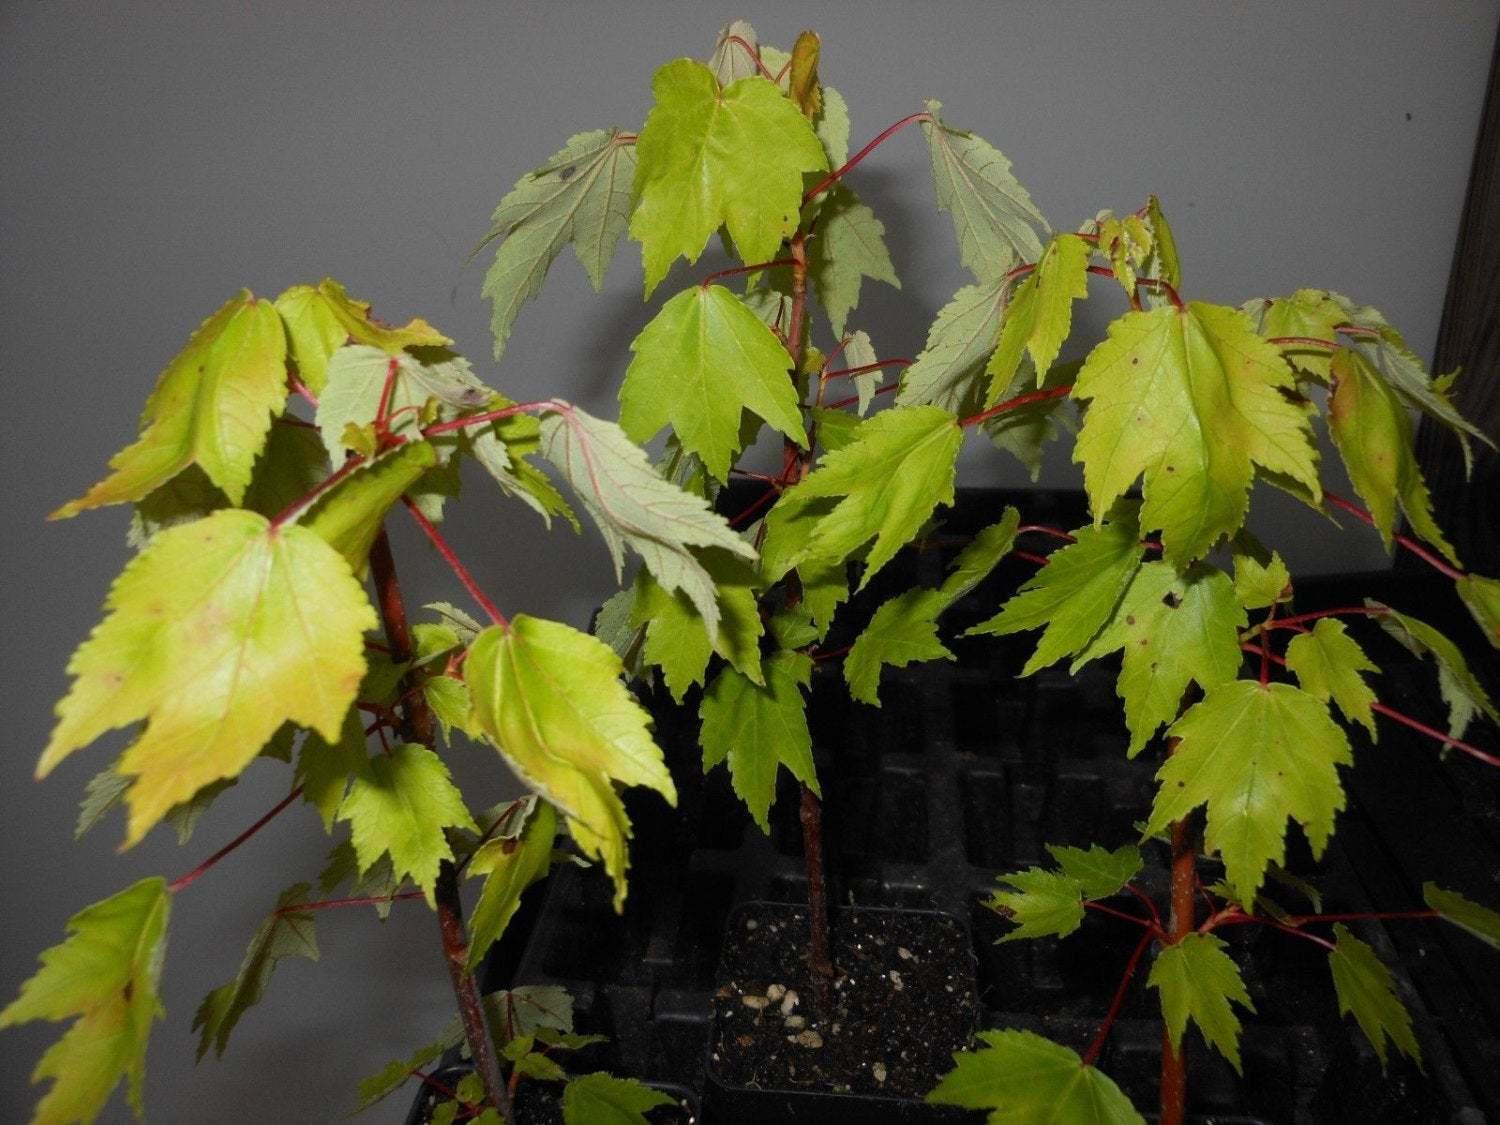 2 Red Maple Trees - Live Potted Plants - 12-16" Tall Seedlings - Quart Pots - The Nursery Center